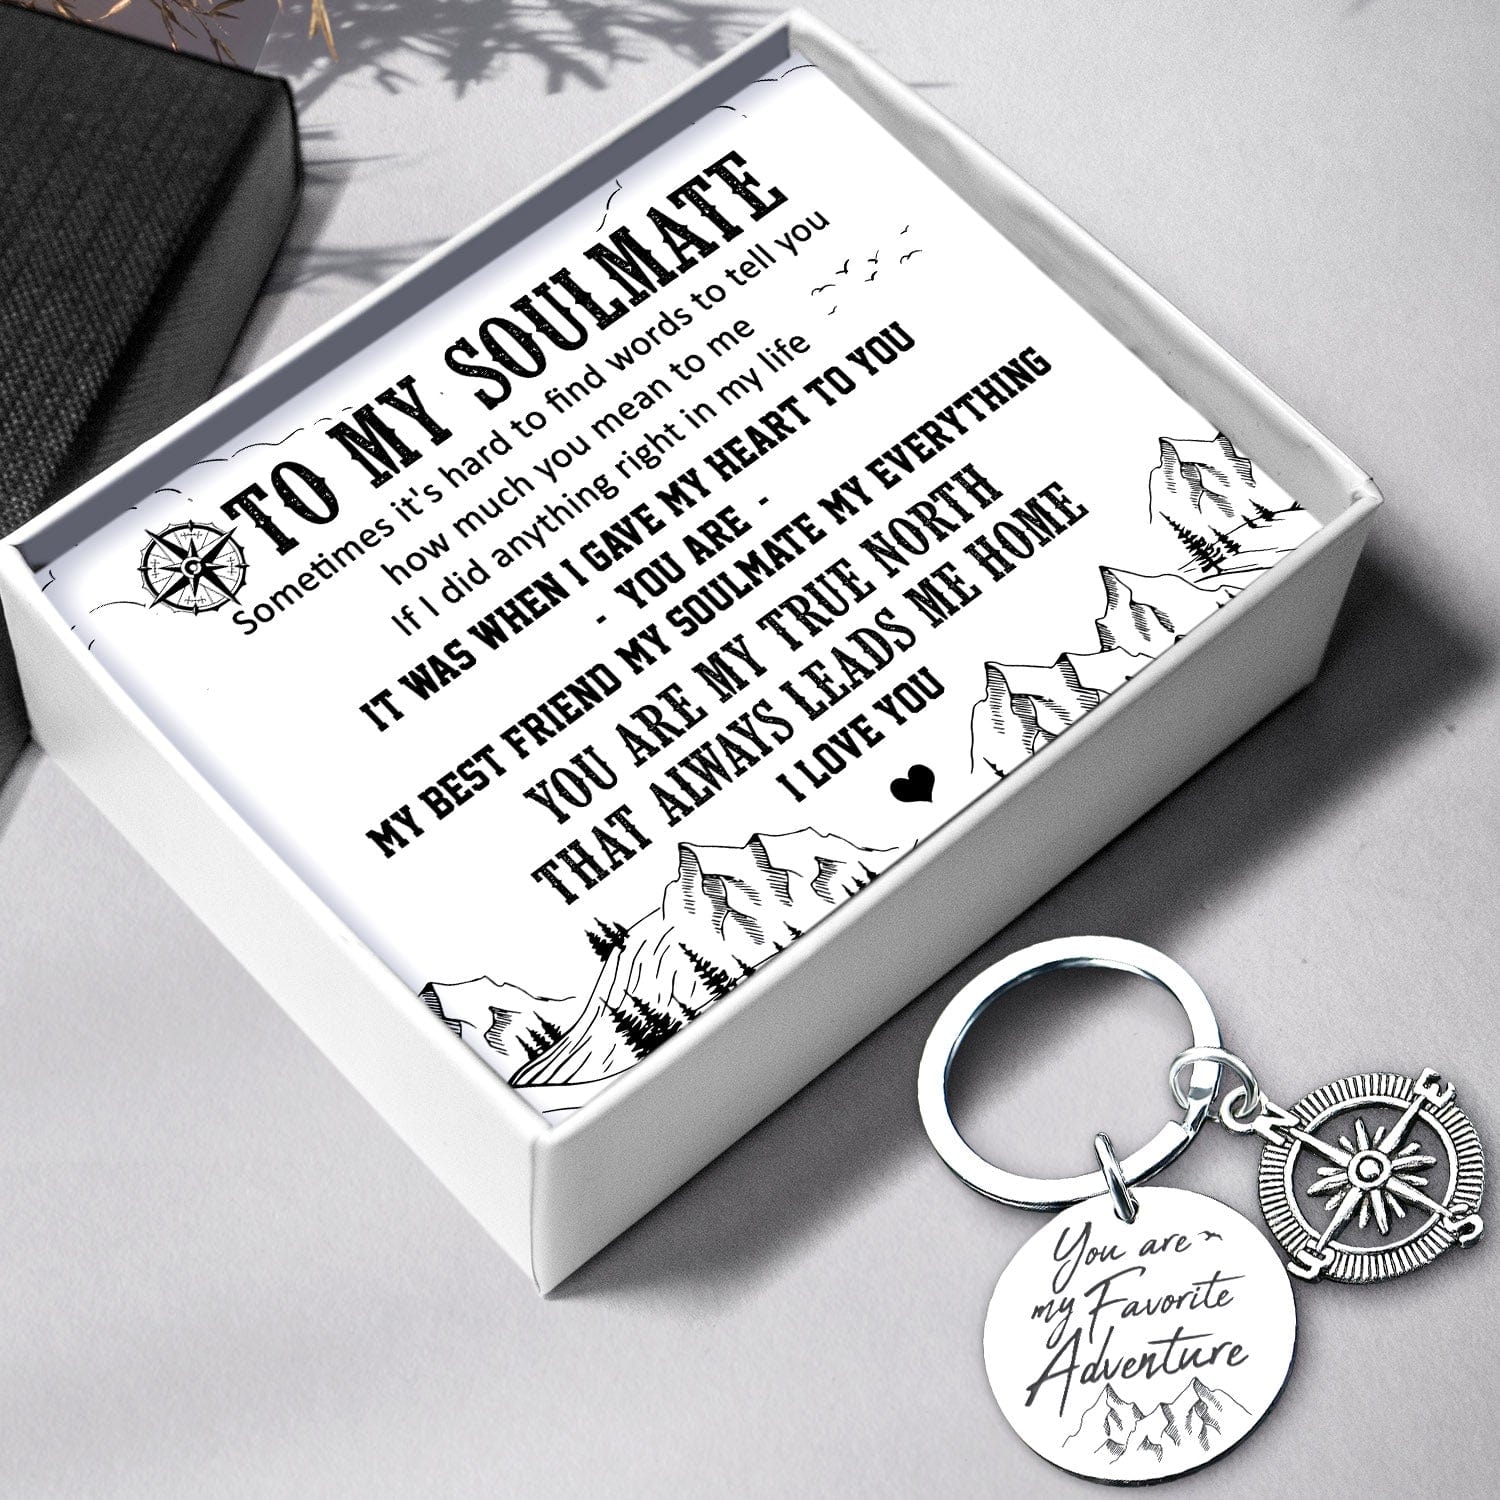 Compass Keychain - Travel - To My Soulmate - I Love You - Gkw13018